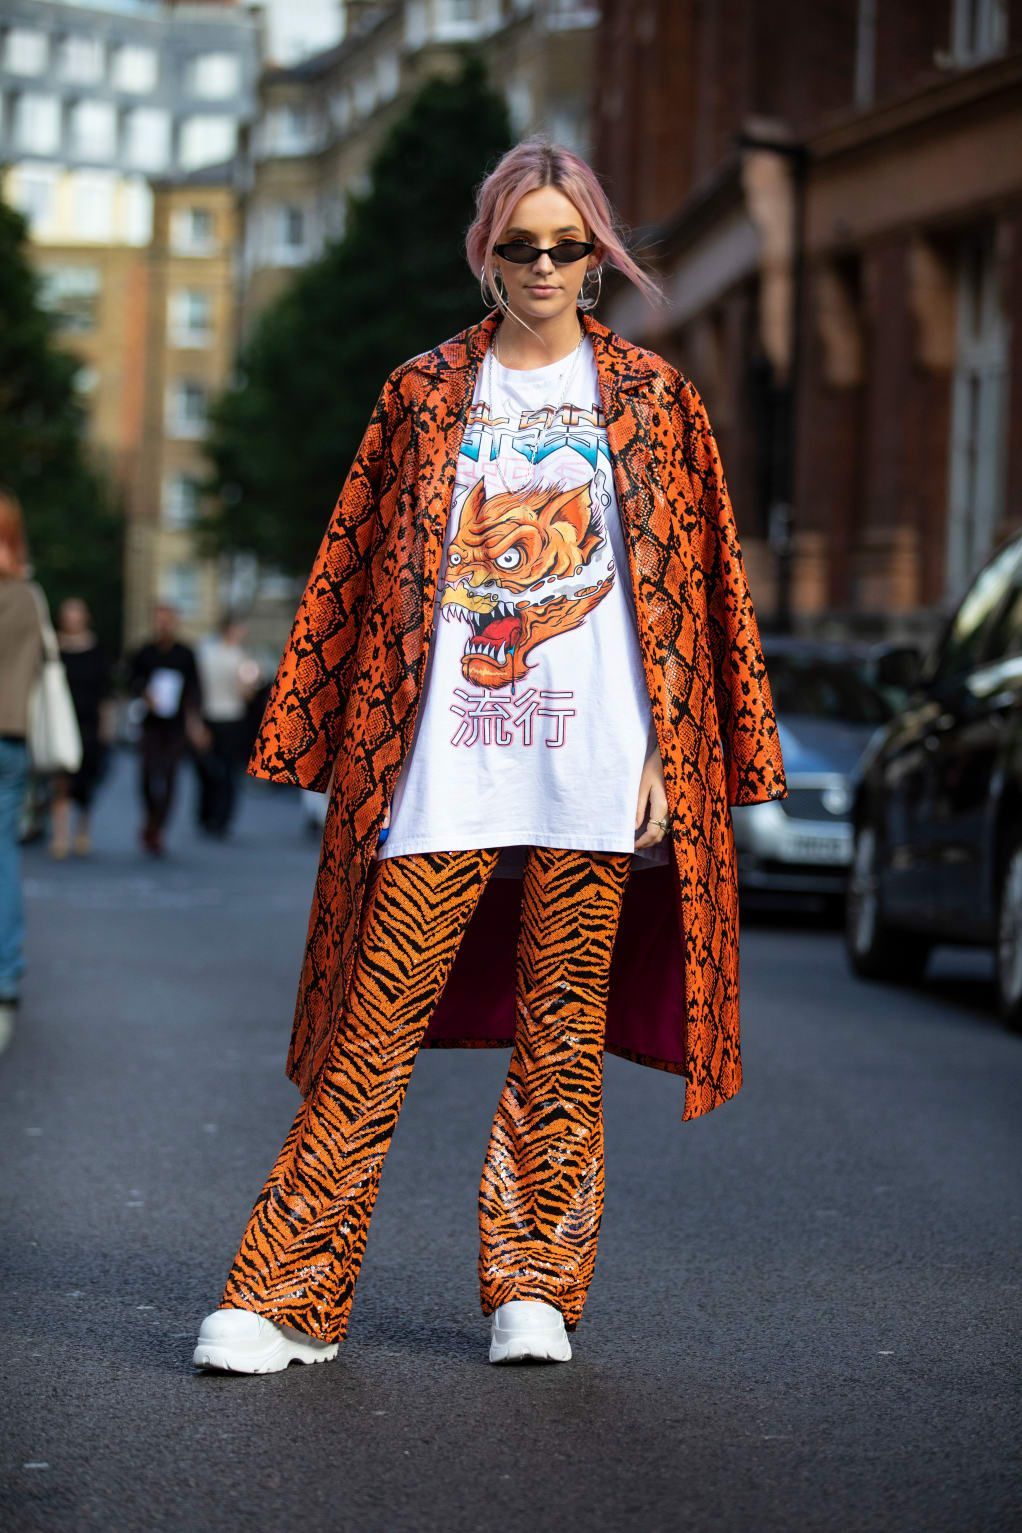 The 78 Best Street Style Looks From Spring 2019 Fashion Month | Fashionista -   24 street style frauen
 ideas